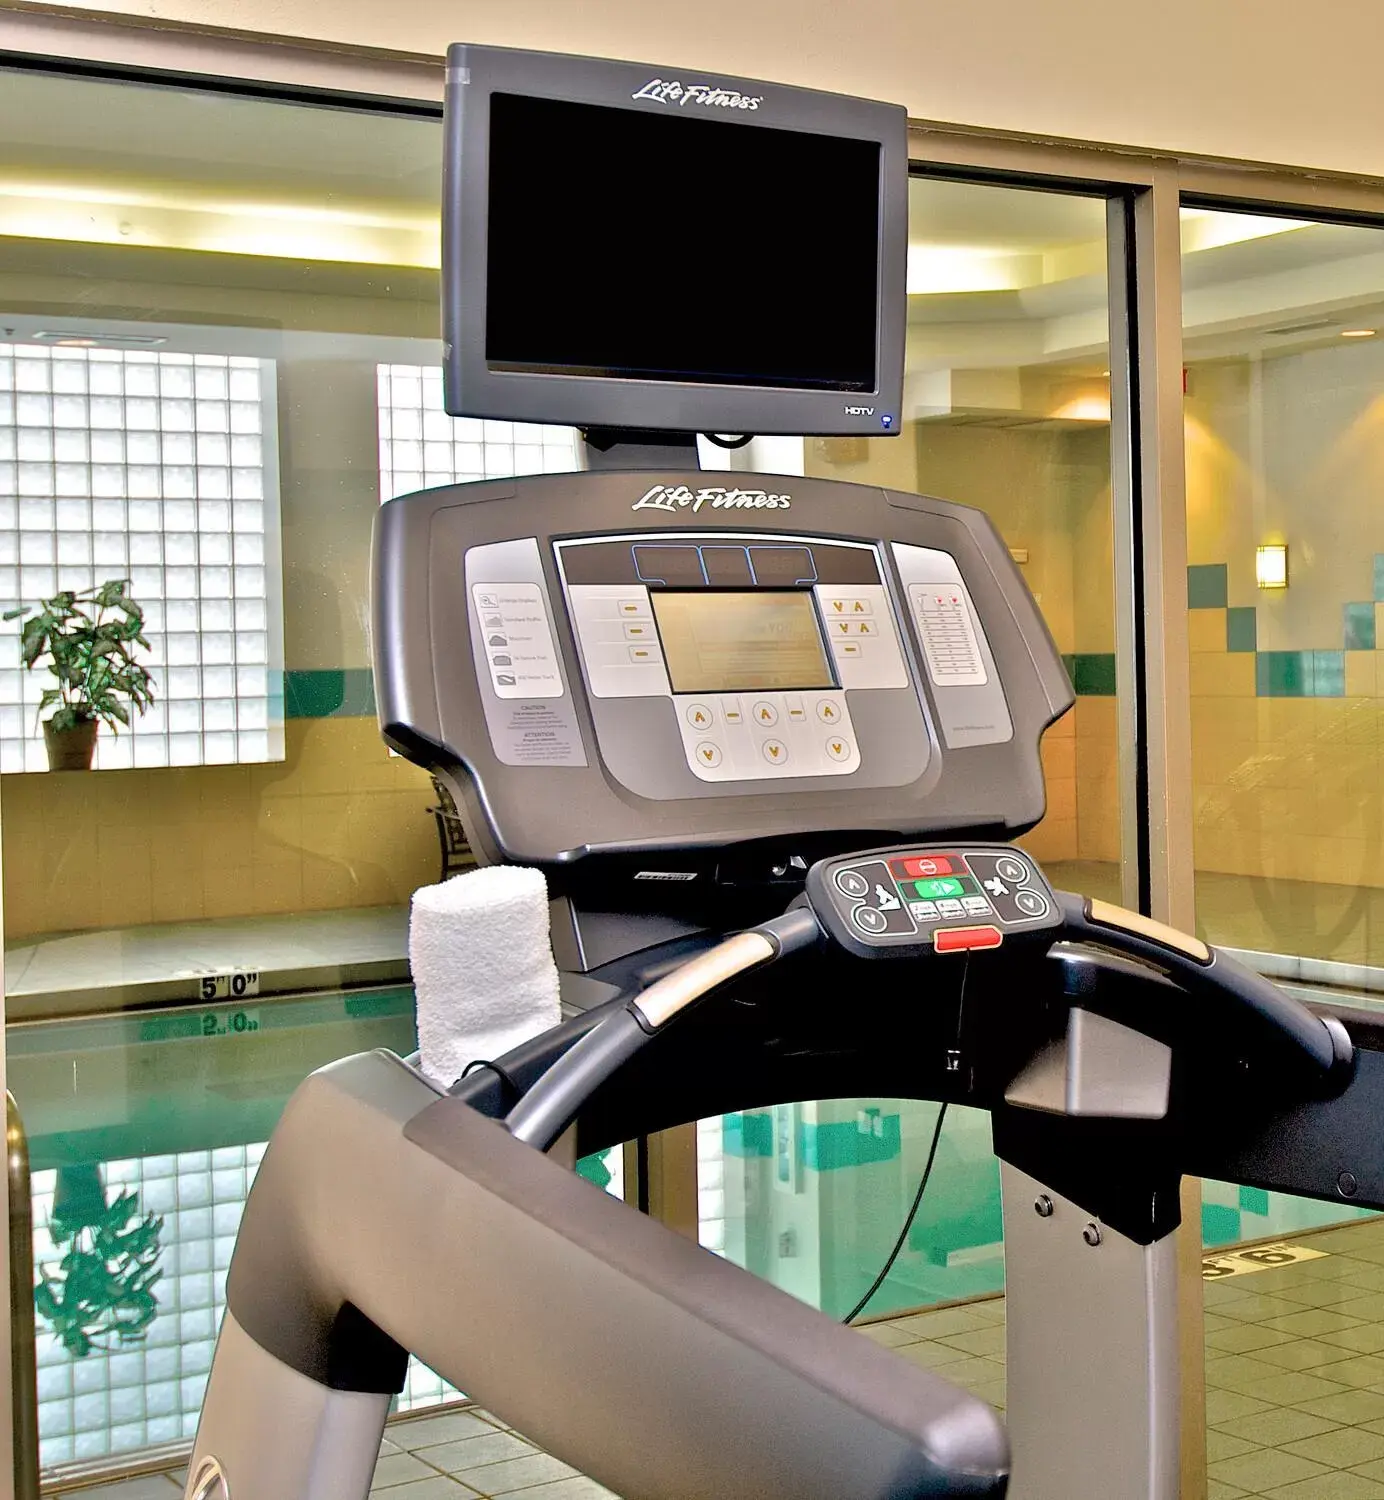 Fitness centre/facilities, Fitness Center/Facilities in Marriott Anchorage Downtown